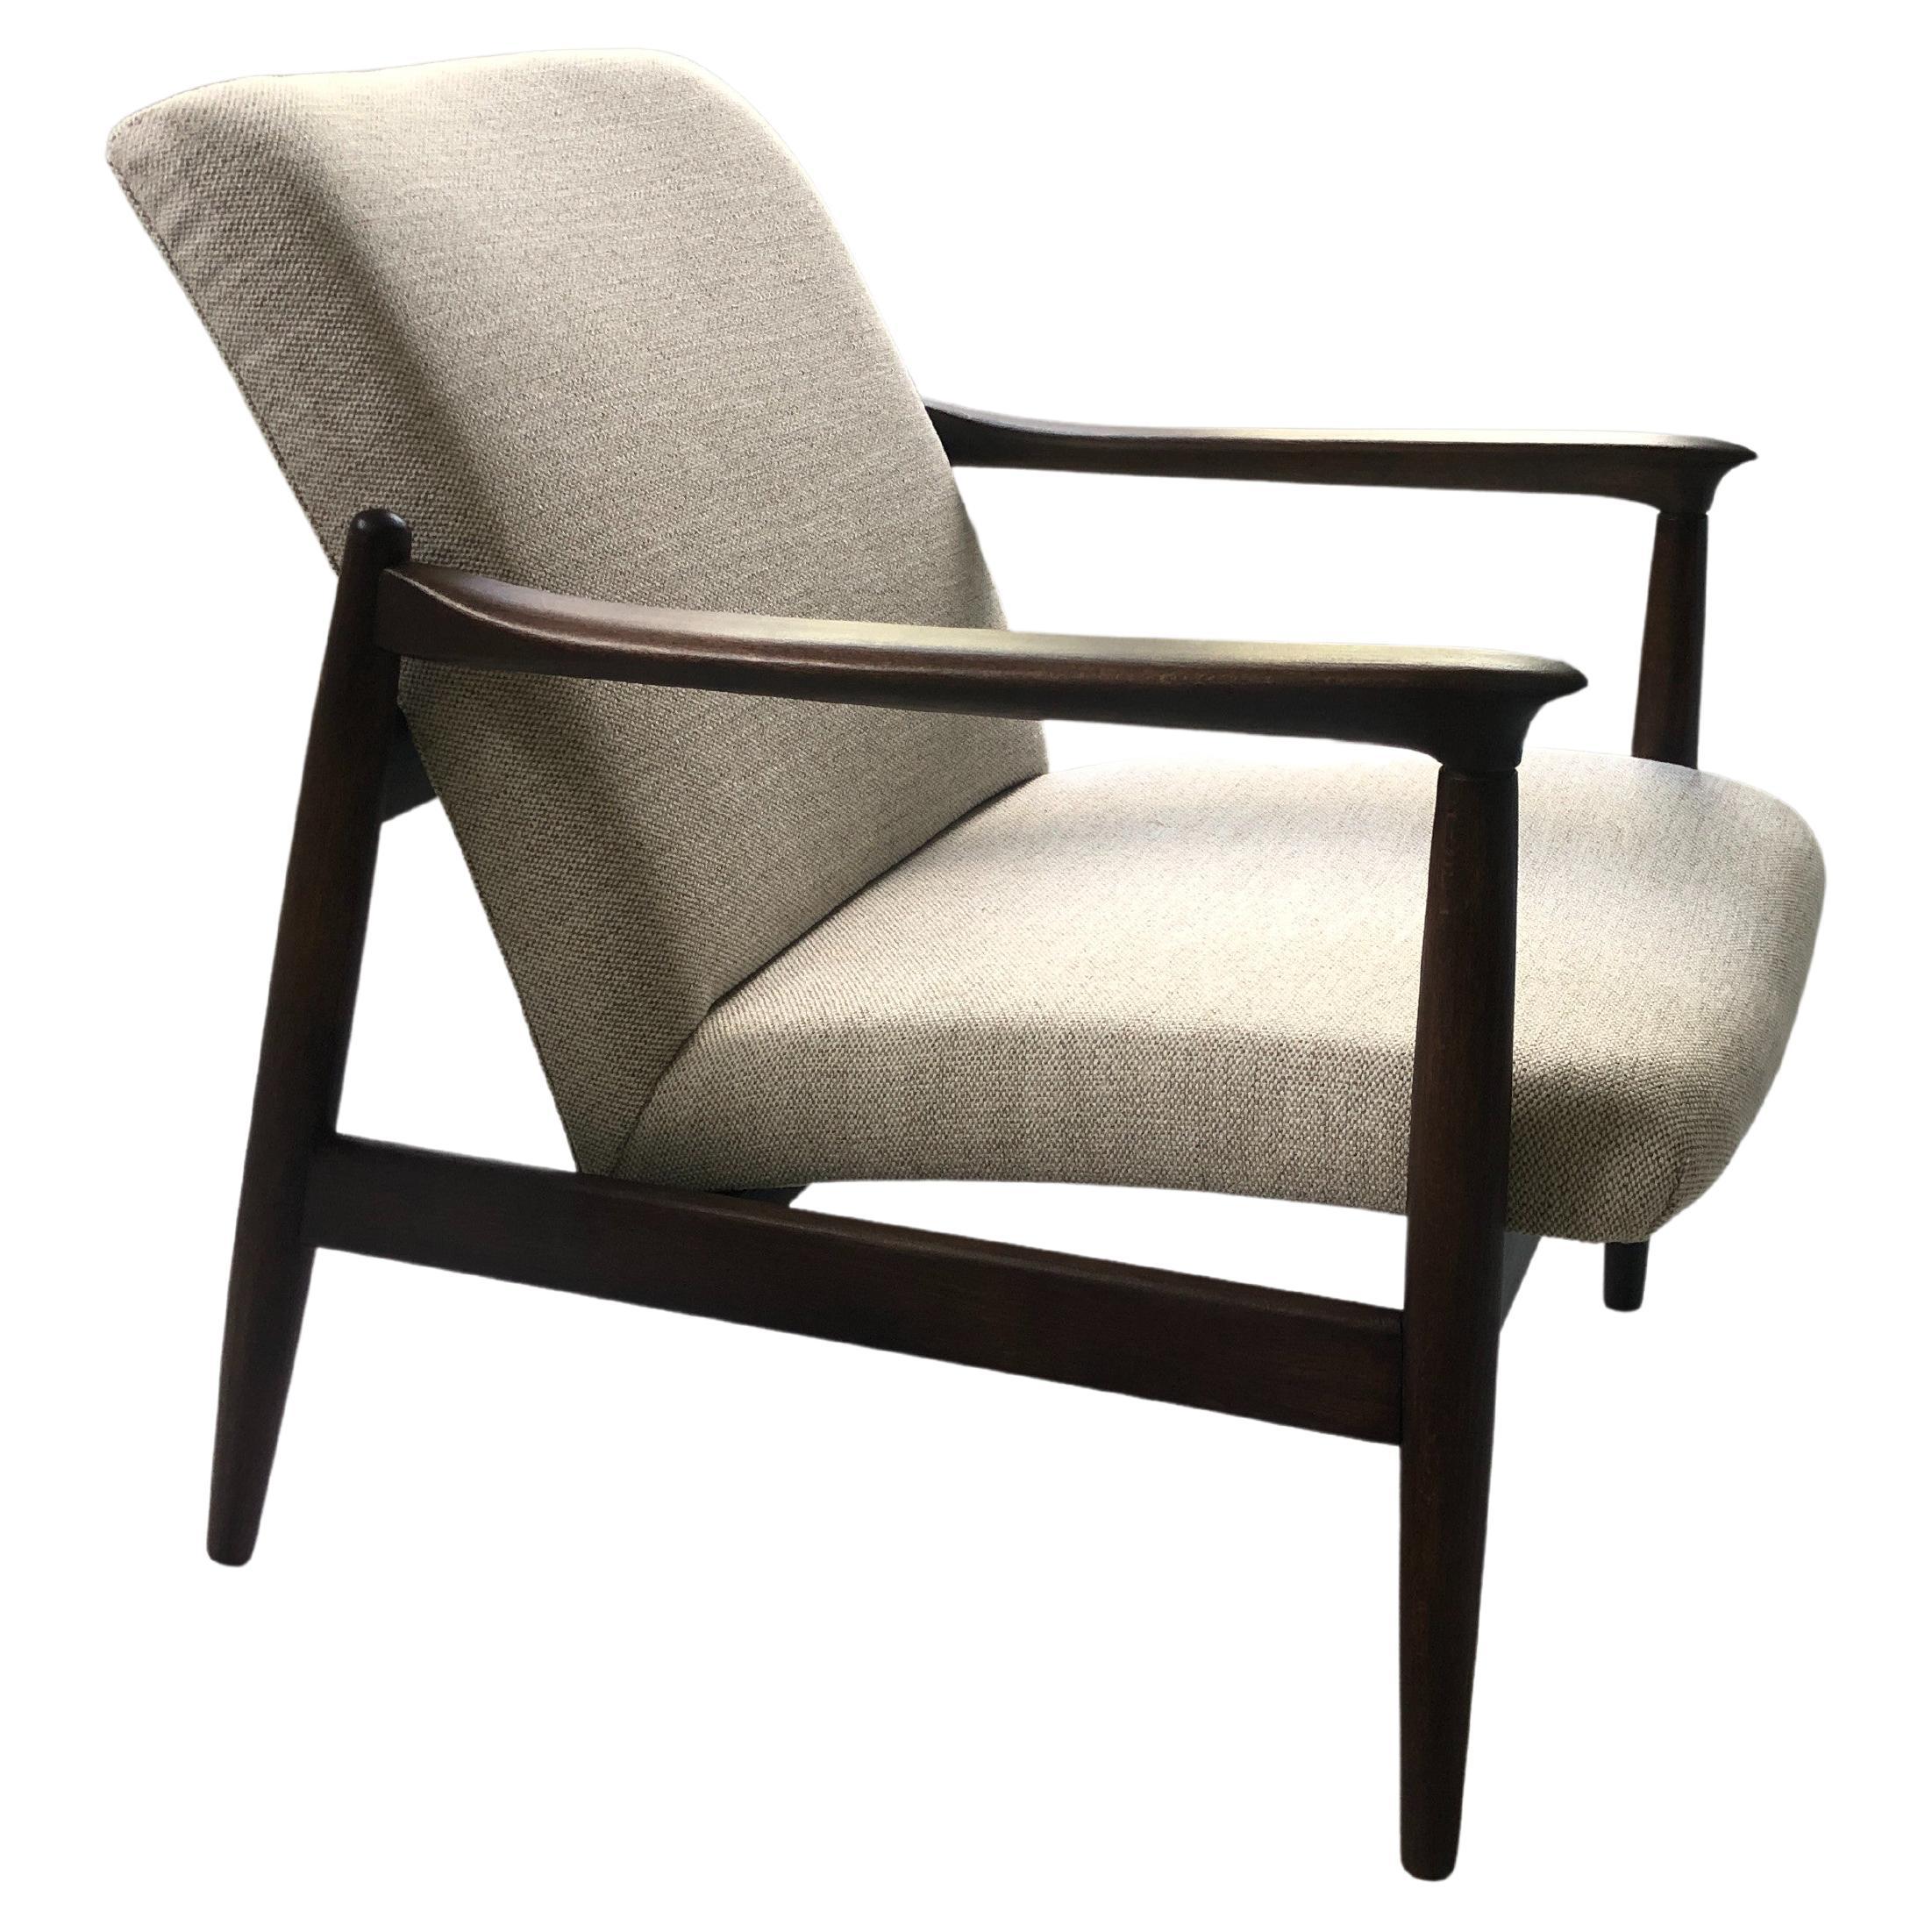 One of the icon of Polish mid-century design, GFM-64 armchair, designed by Prof. Edmund Homa - Polish architect, industrial and interior design designer, professor at the Academy of Fine Arts in Gdansk. The armchair has been manufactured by